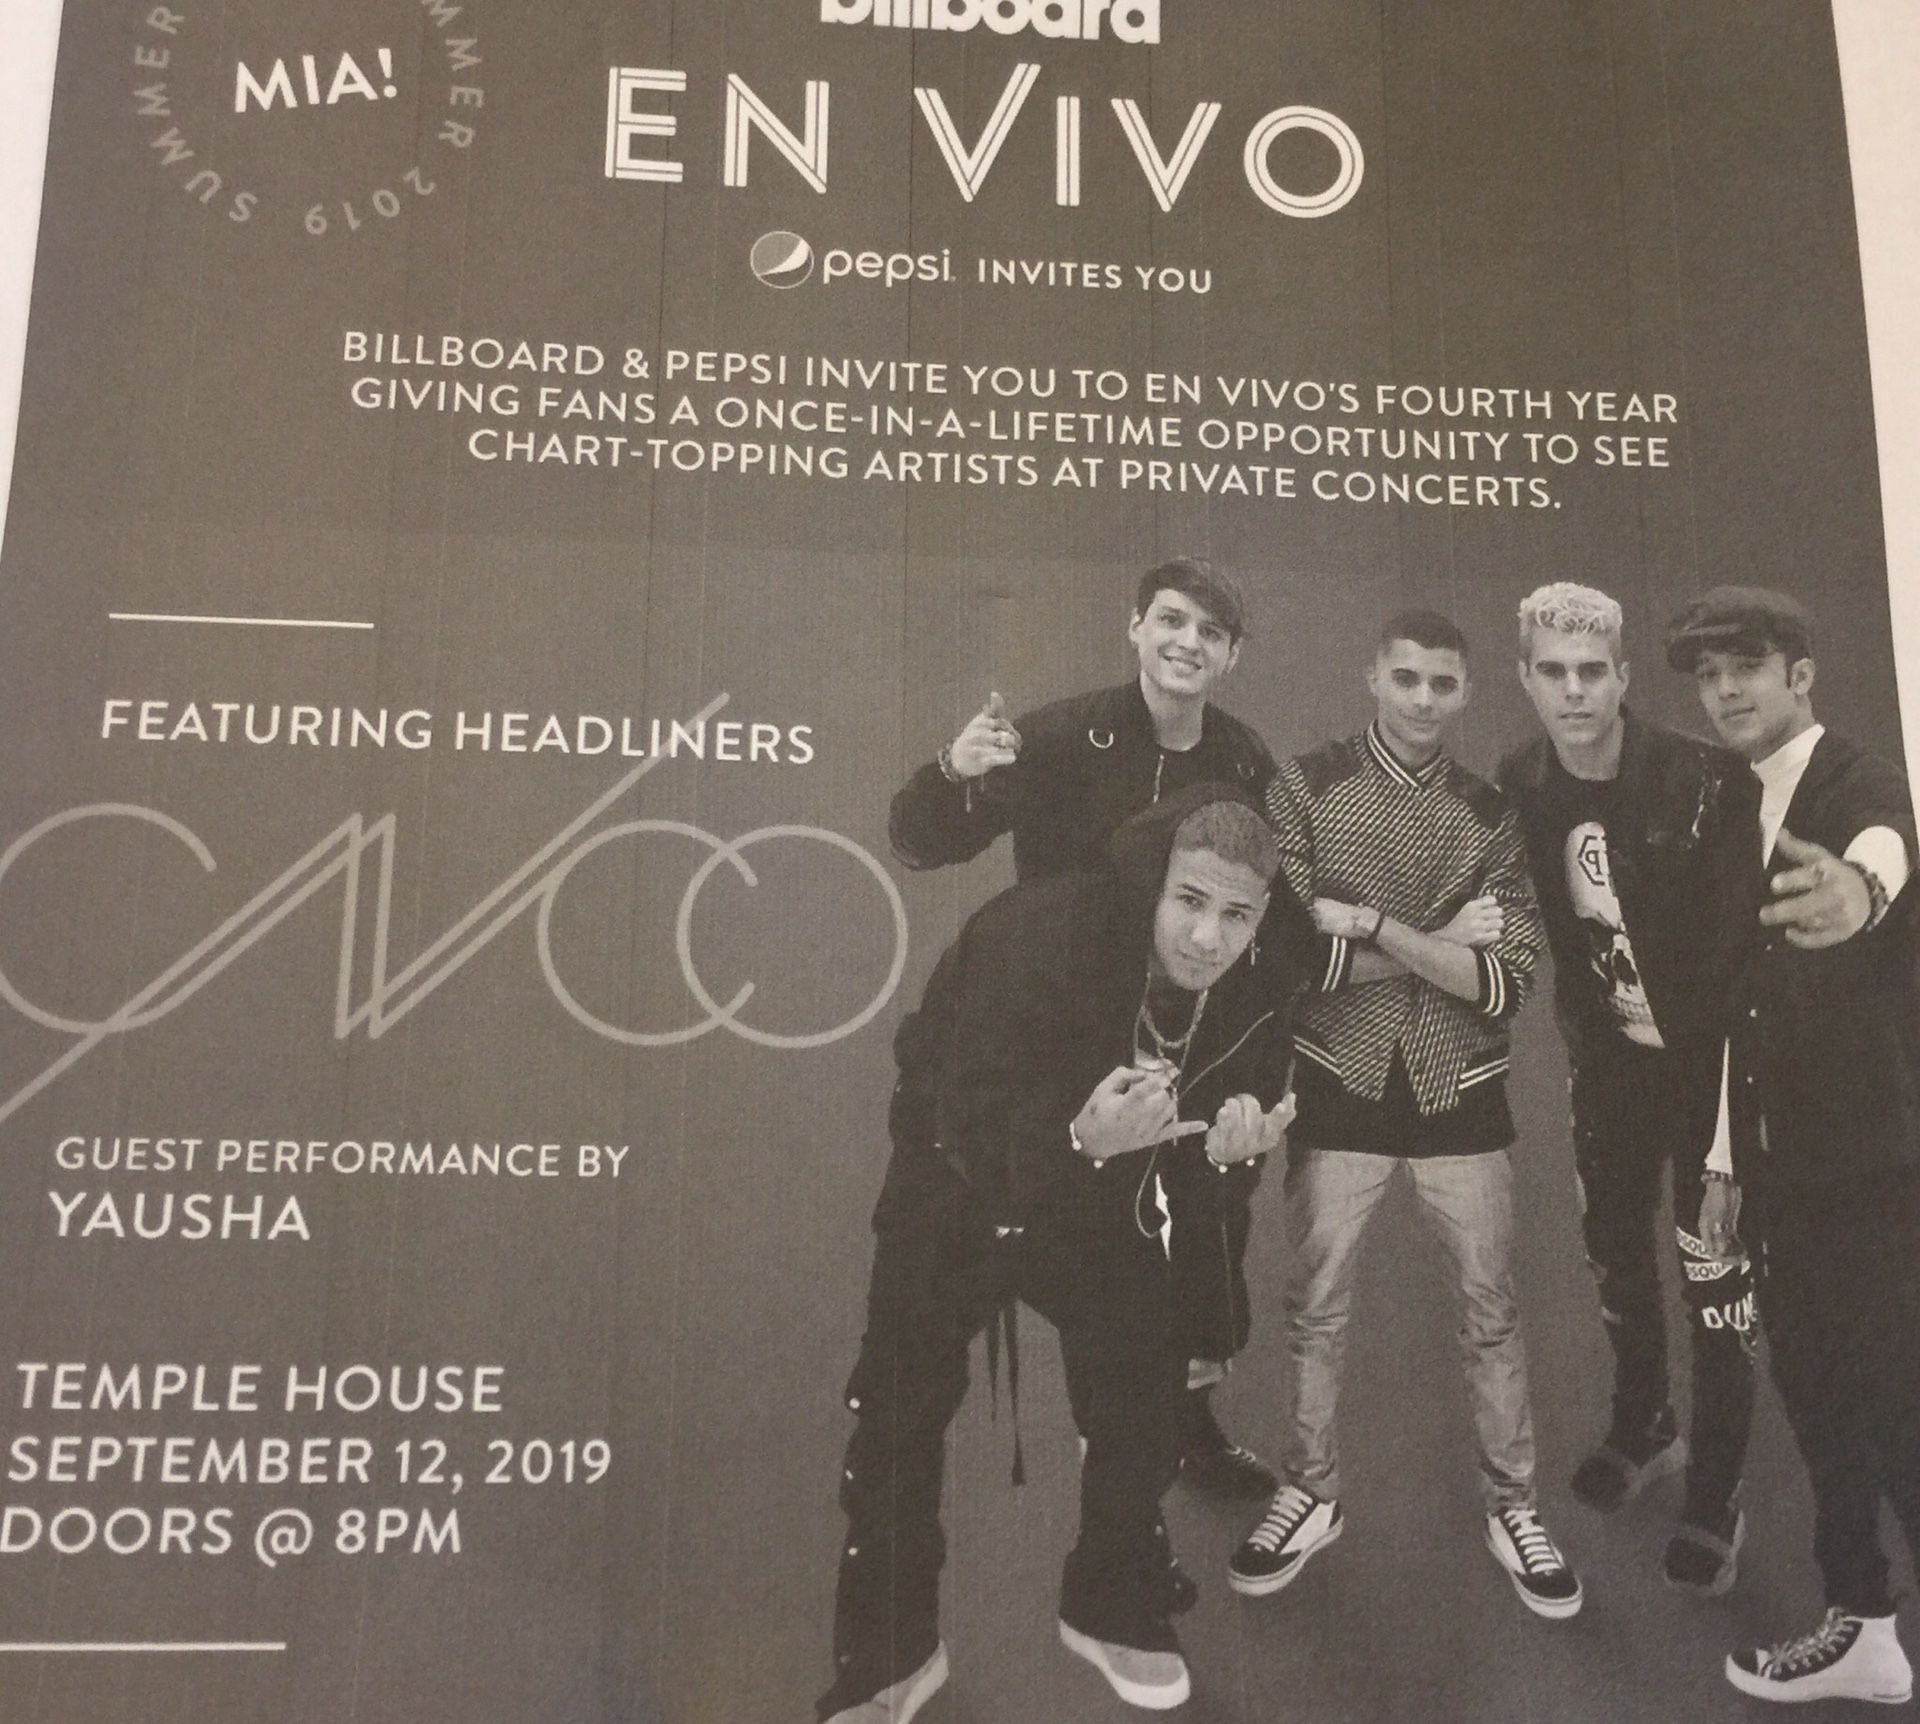 CNCO with Yausha Private Concert @ Temple House Miami Beach 9/12